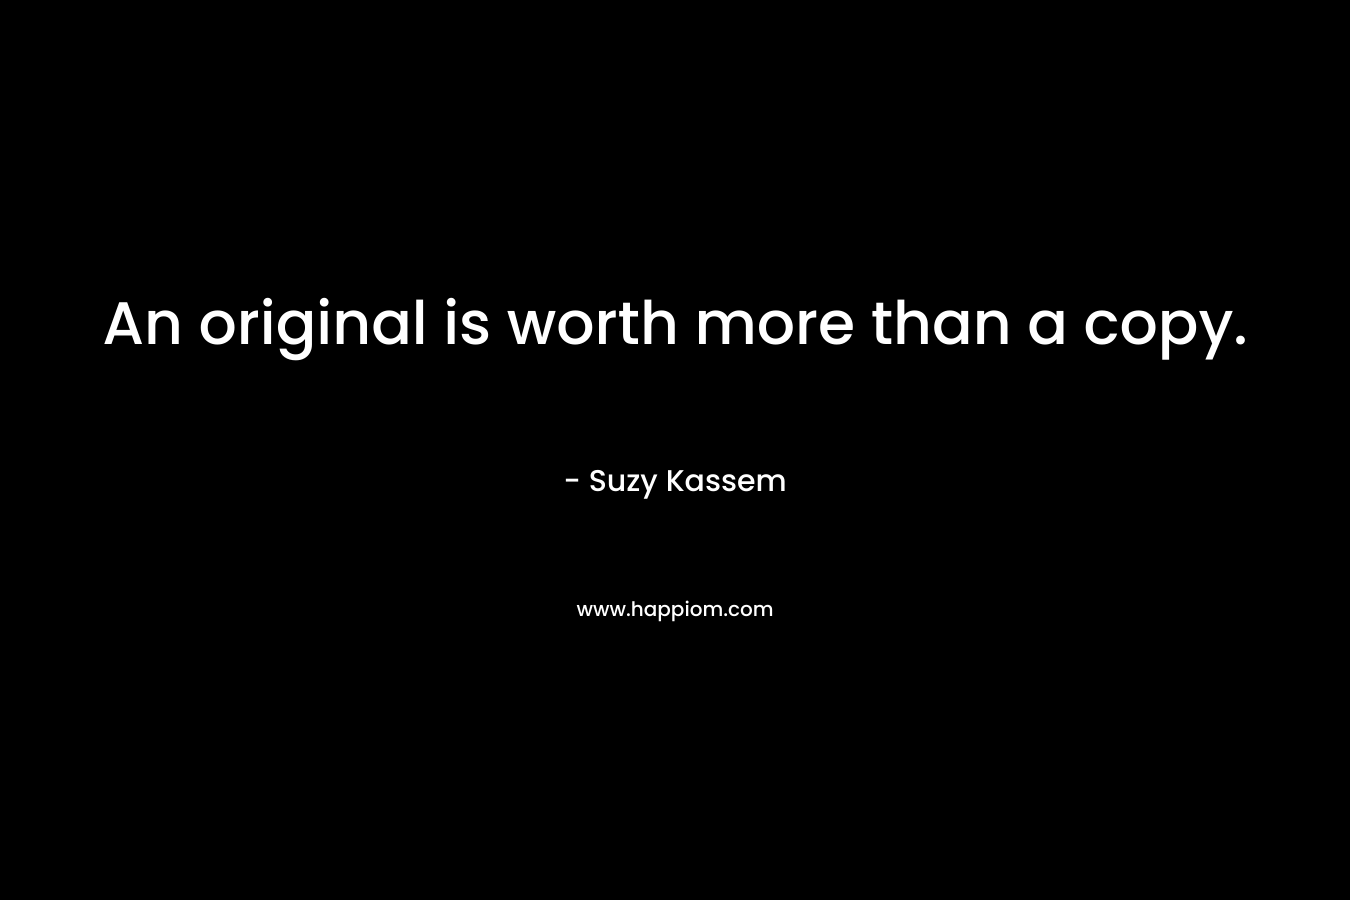 An original is worth more than a copy.